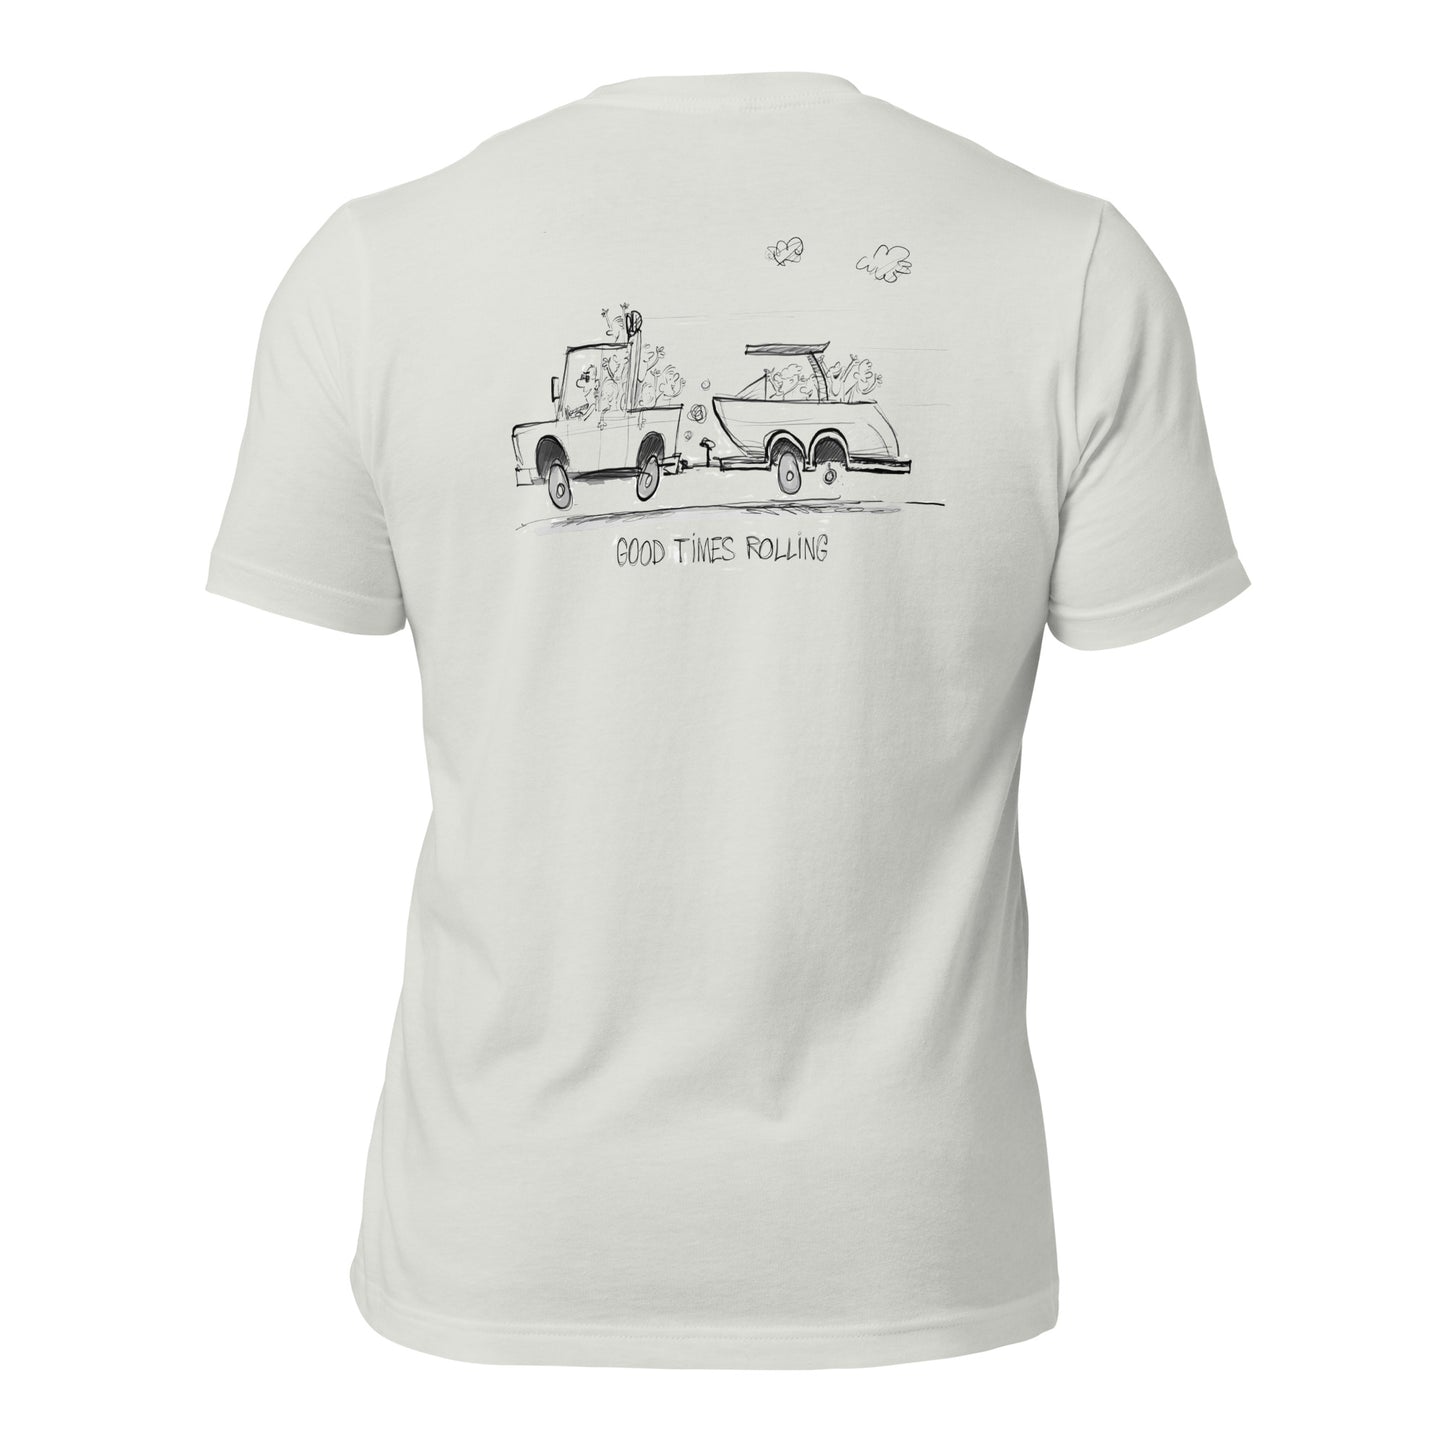 Good Times Rolling Tee